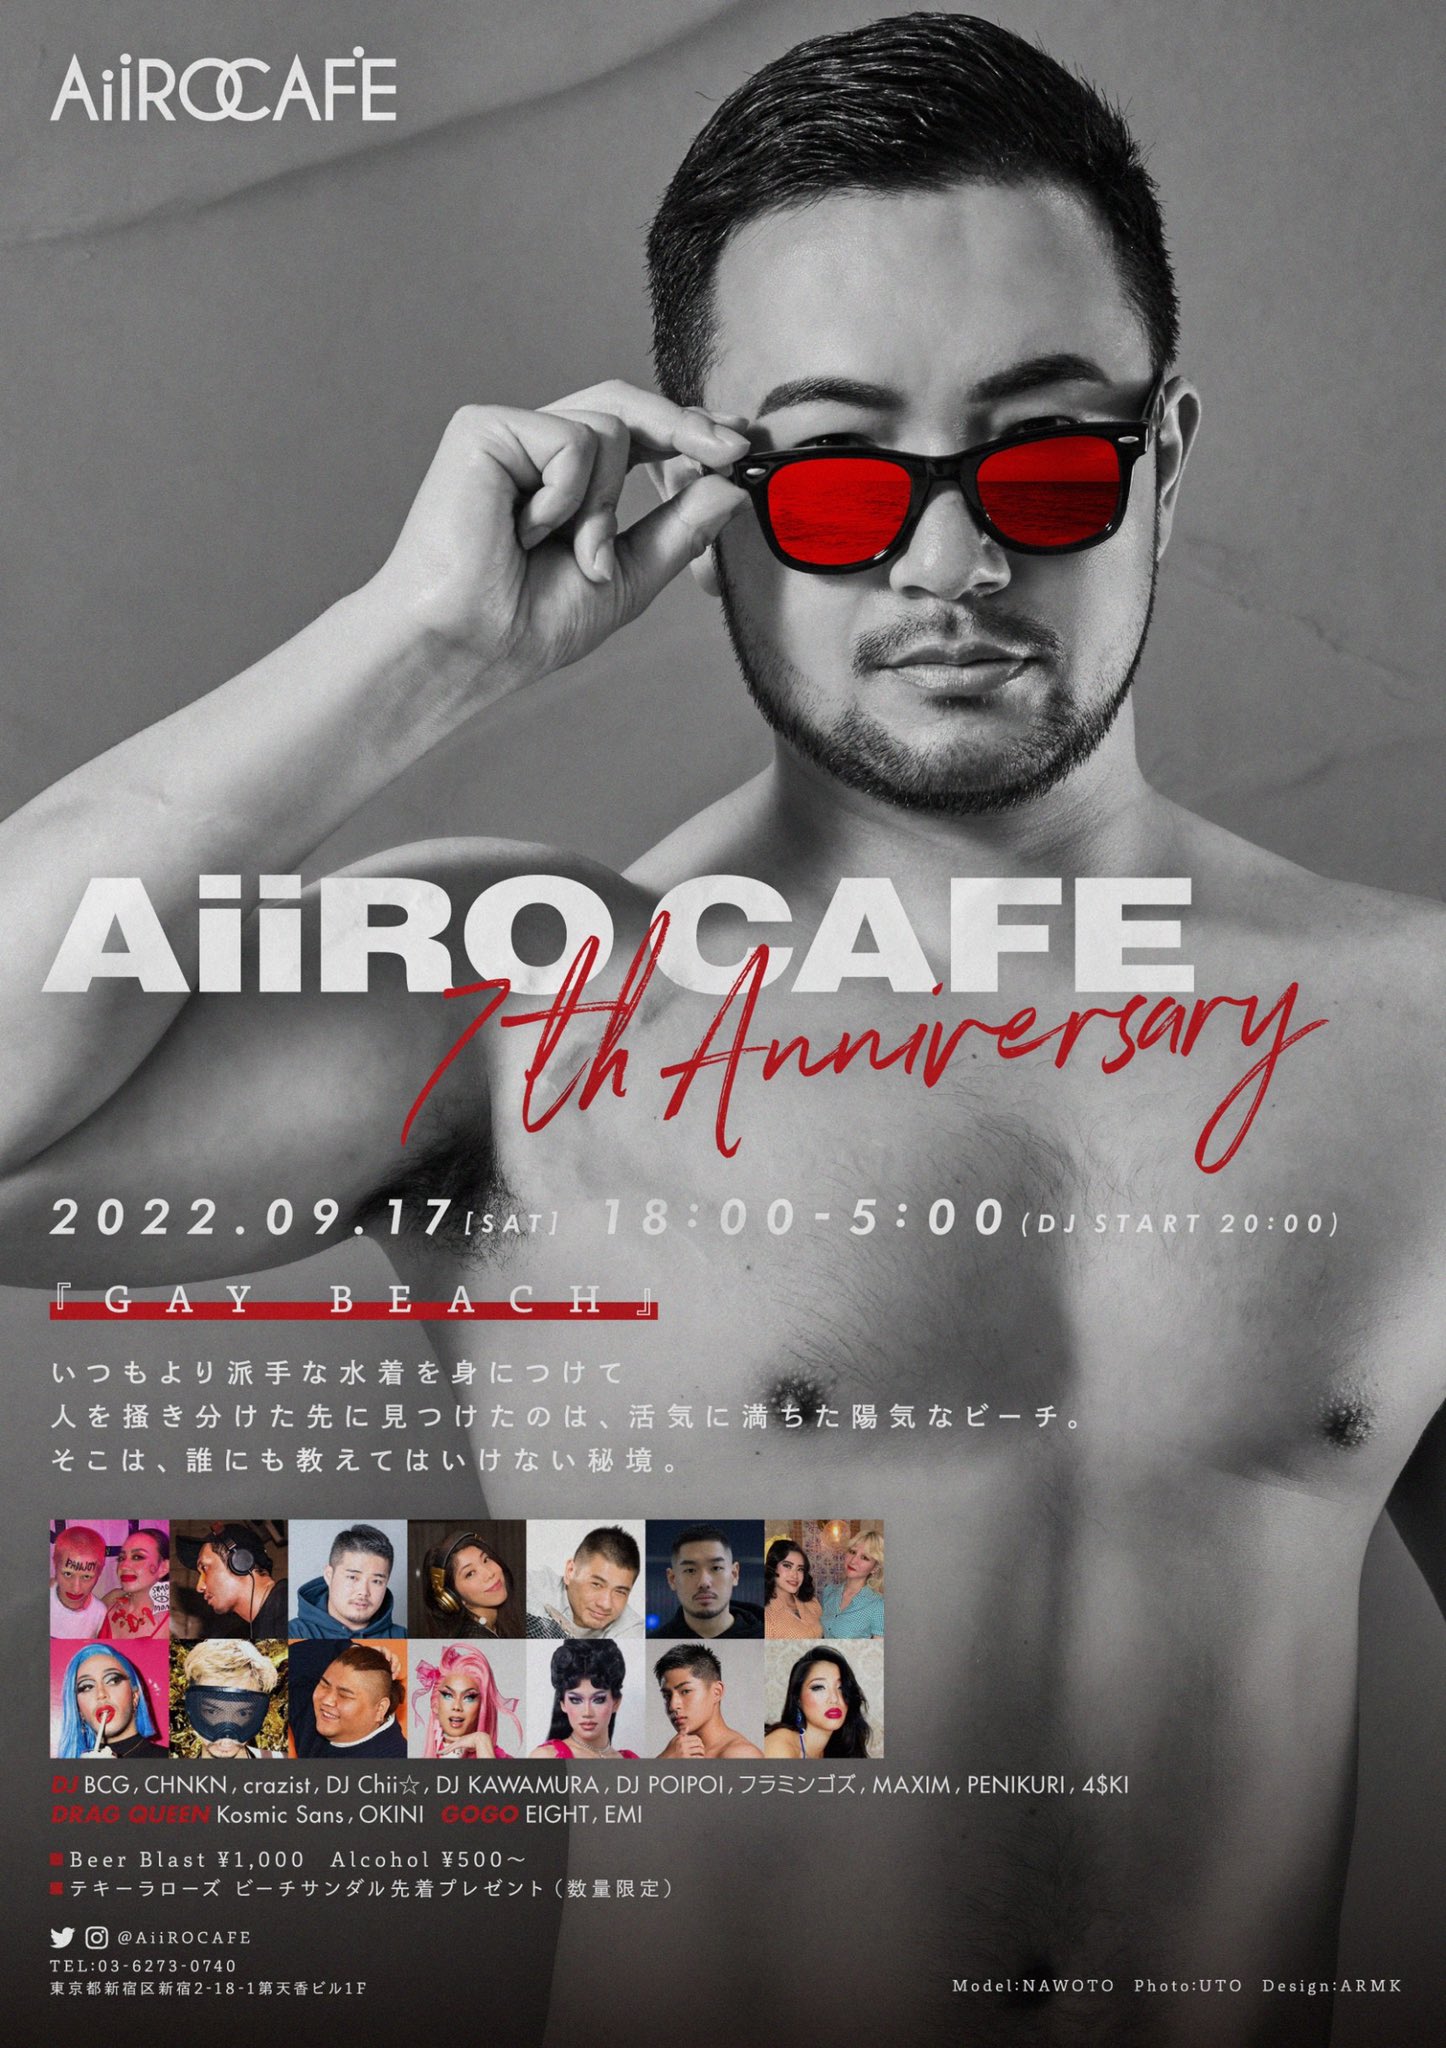 AiiRO CAFE 7th ANNIVERSARY PARTY